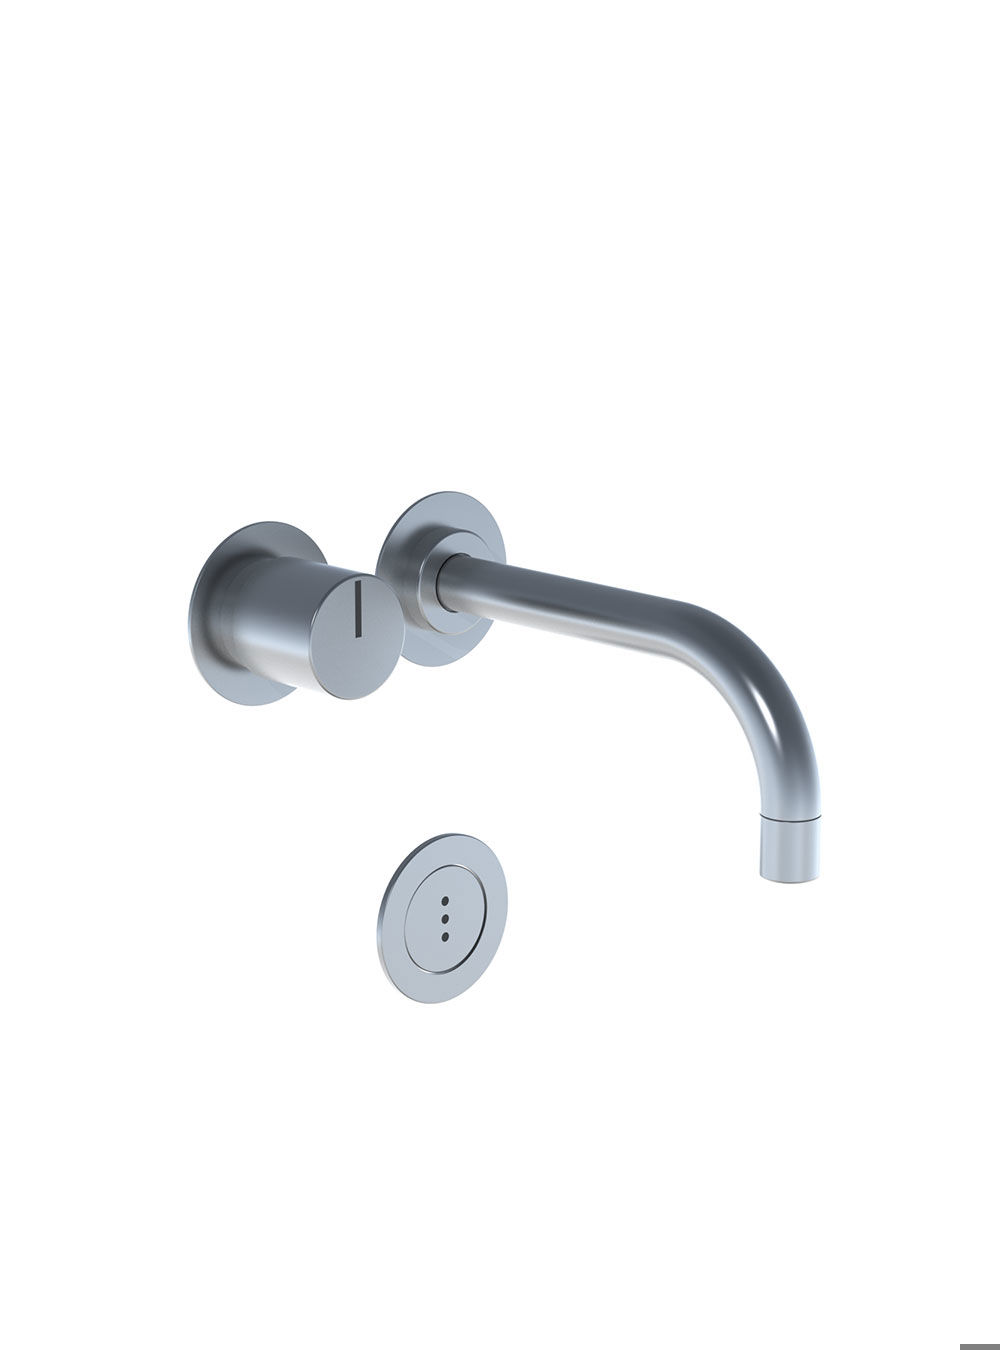 4911VS: Build-in basin mixer with on-off sensor for ‘hands free’ operation. For vertical mounting. Sensor al